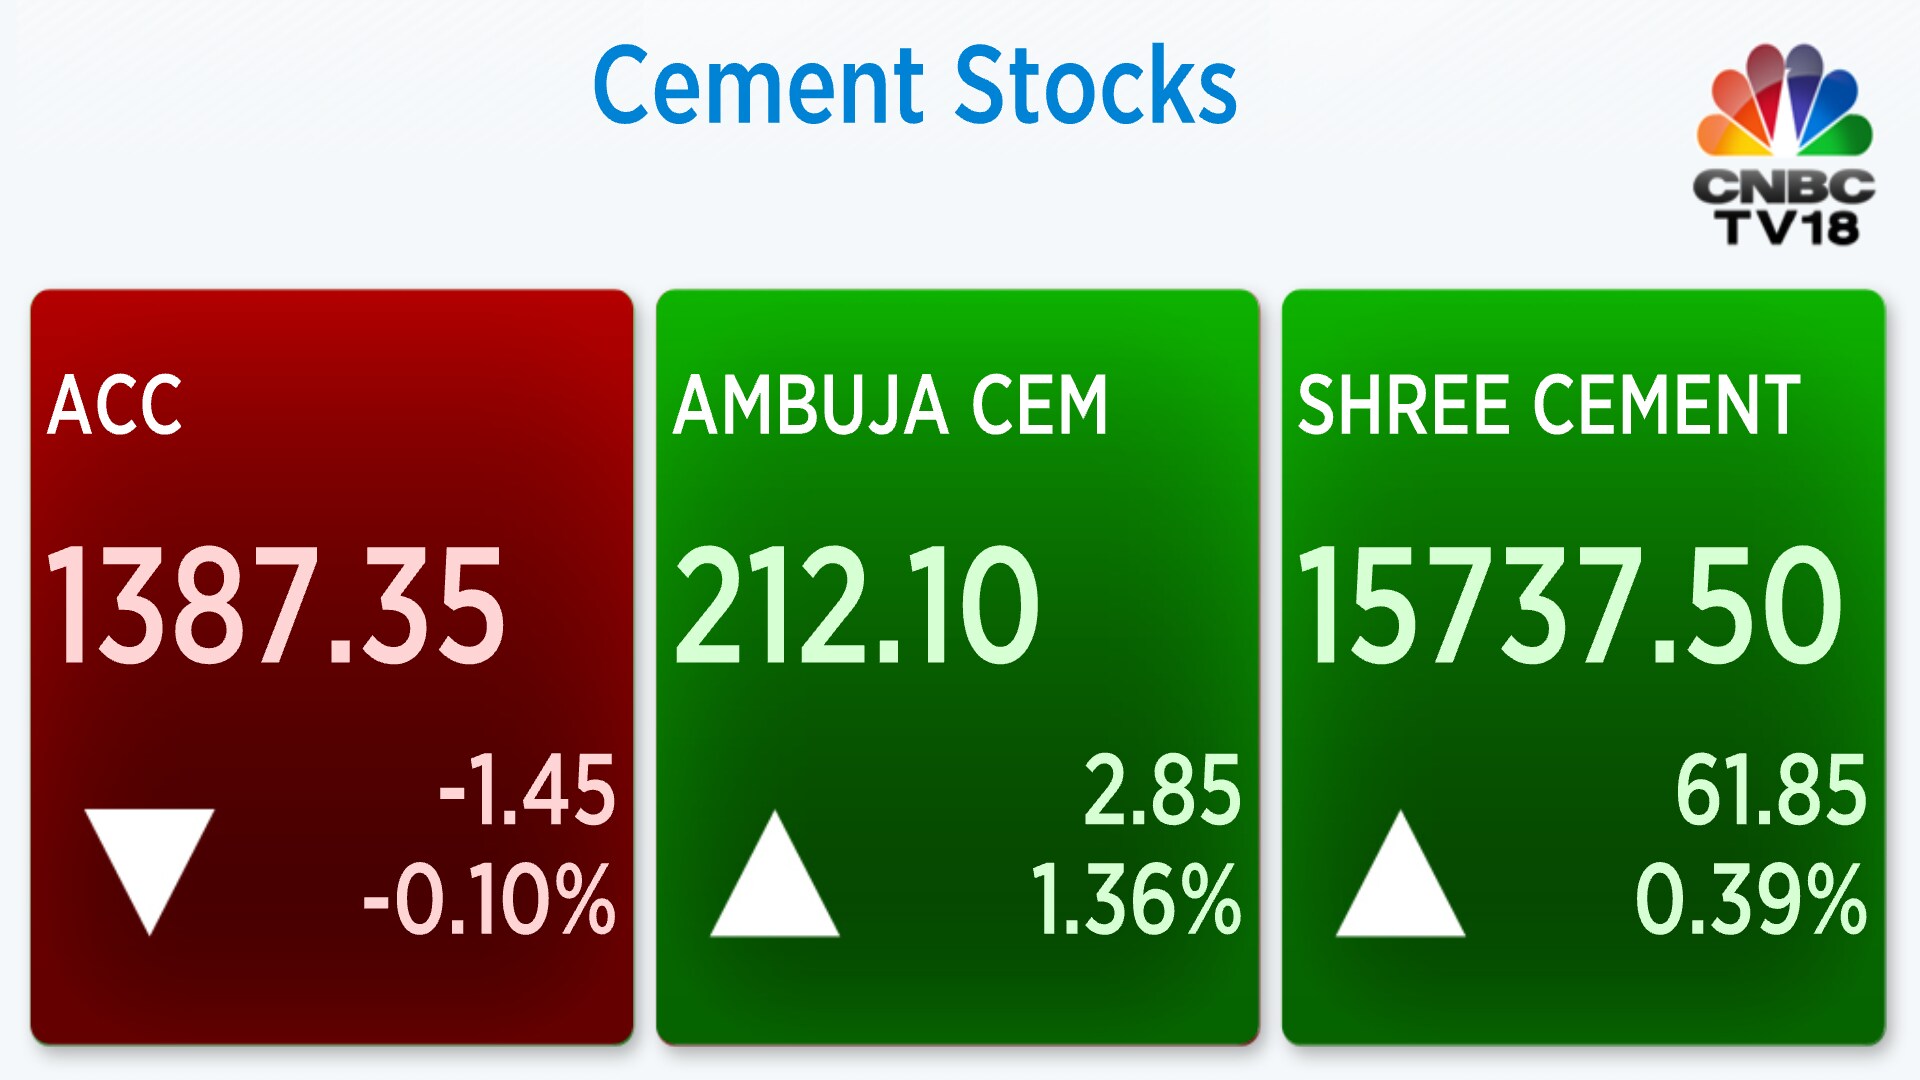 Cement stocks rise 3.5% in one week on quarterly performance - cnbctv18.com